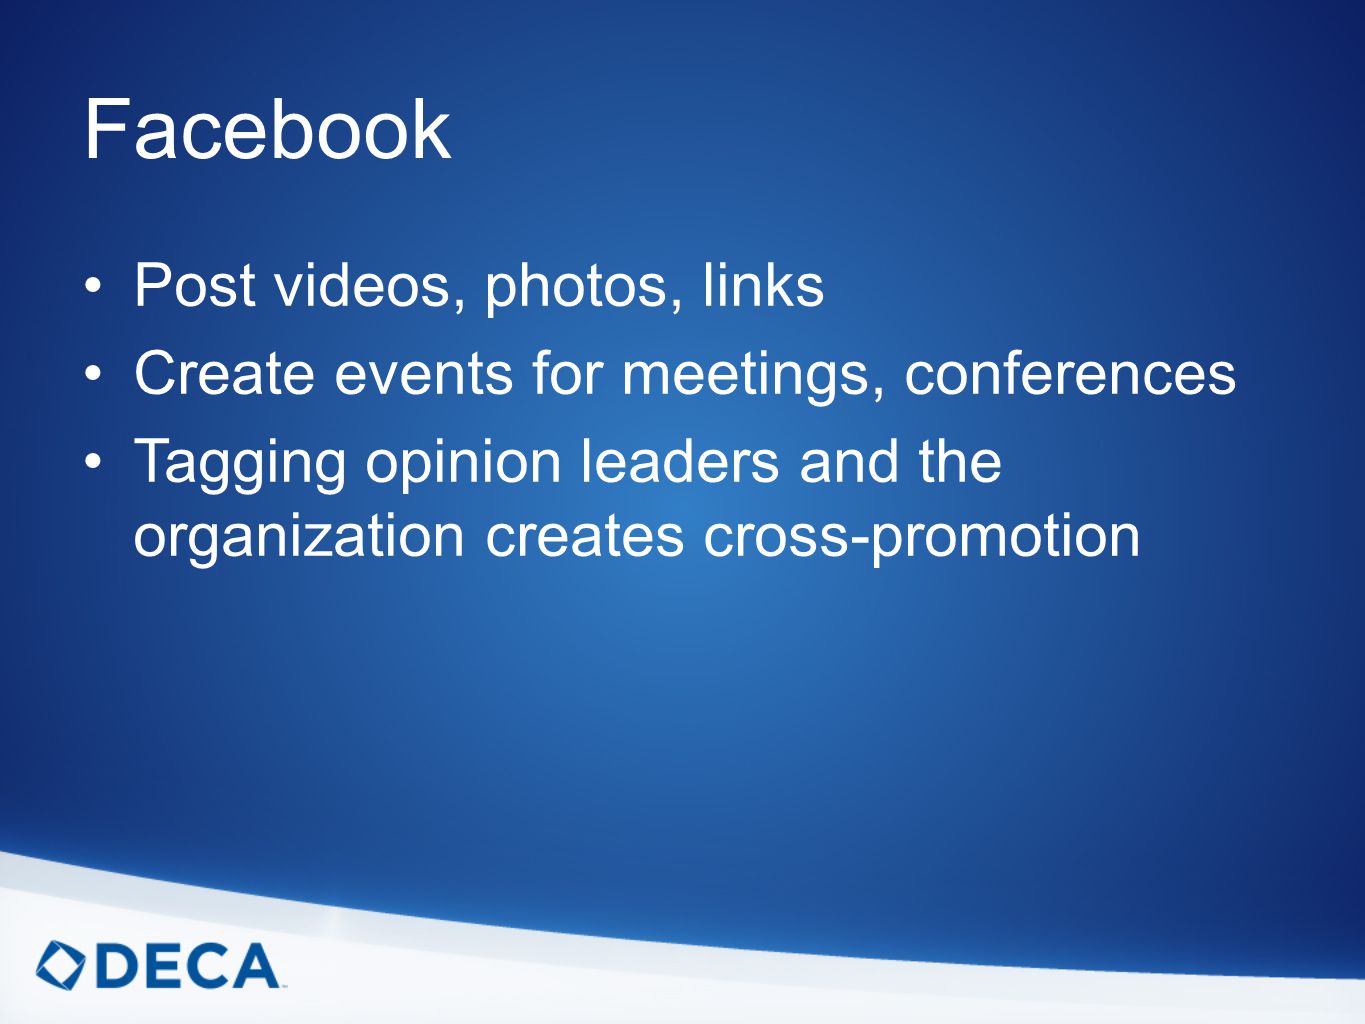 Post videos, photos, links Create events for meetings, conferences Tagging opinion leaders and the organization creates cross-promotion